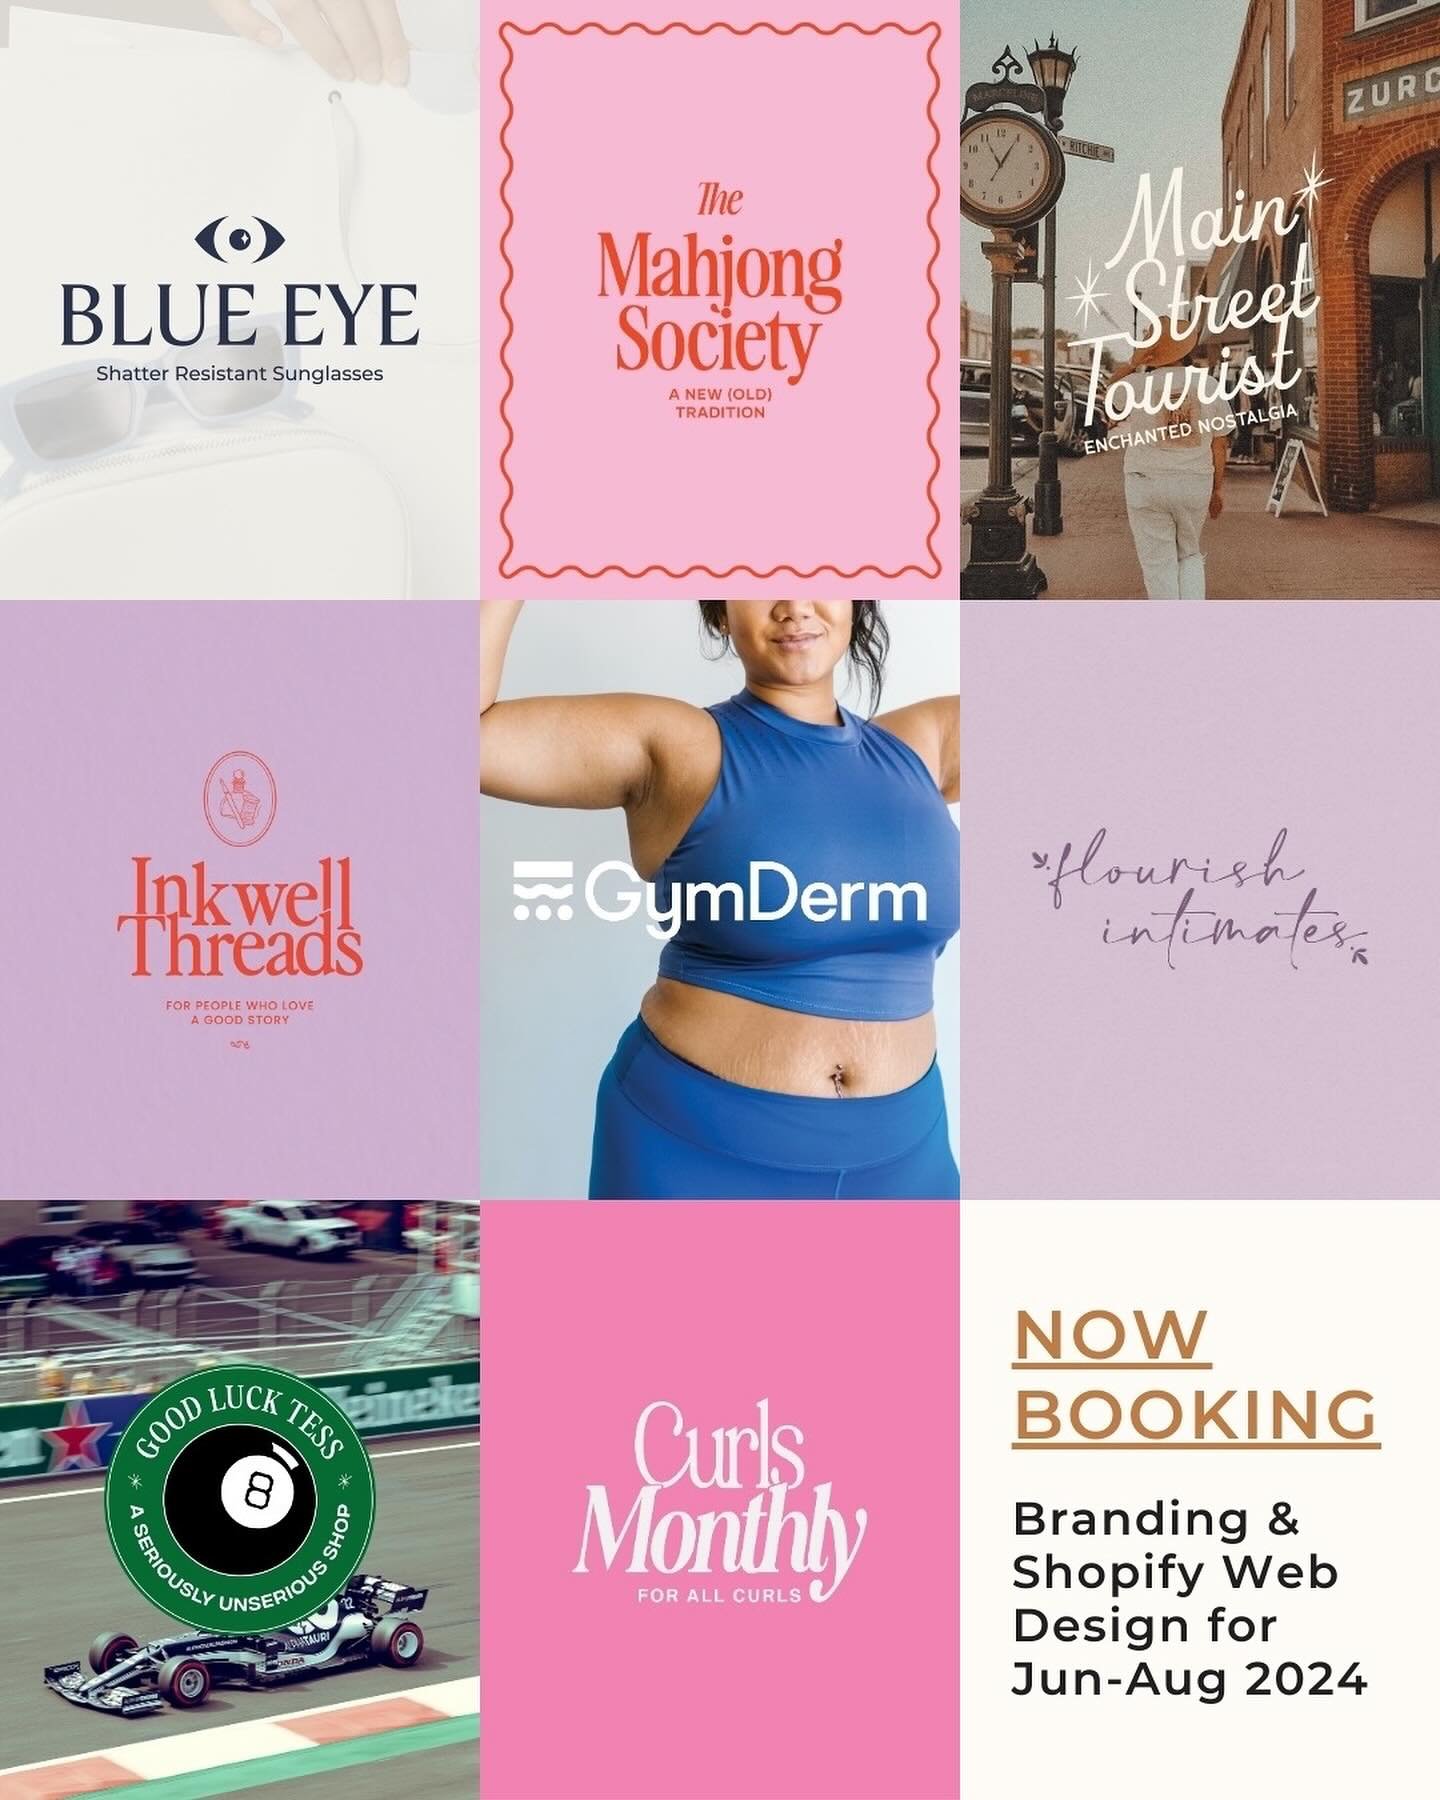 NOW BOOKING &rarr; Branding &amp; Shopify Web Design Projects for Jun-Aug 2024
⠀⠀⠀⠀⠀⠀⠀⠀⠀
We see you. You&rsquo;ve done a great job at building your business to where it&rsquo;s at now. But, you can admit that your DIY Canva logo and piecemeal website